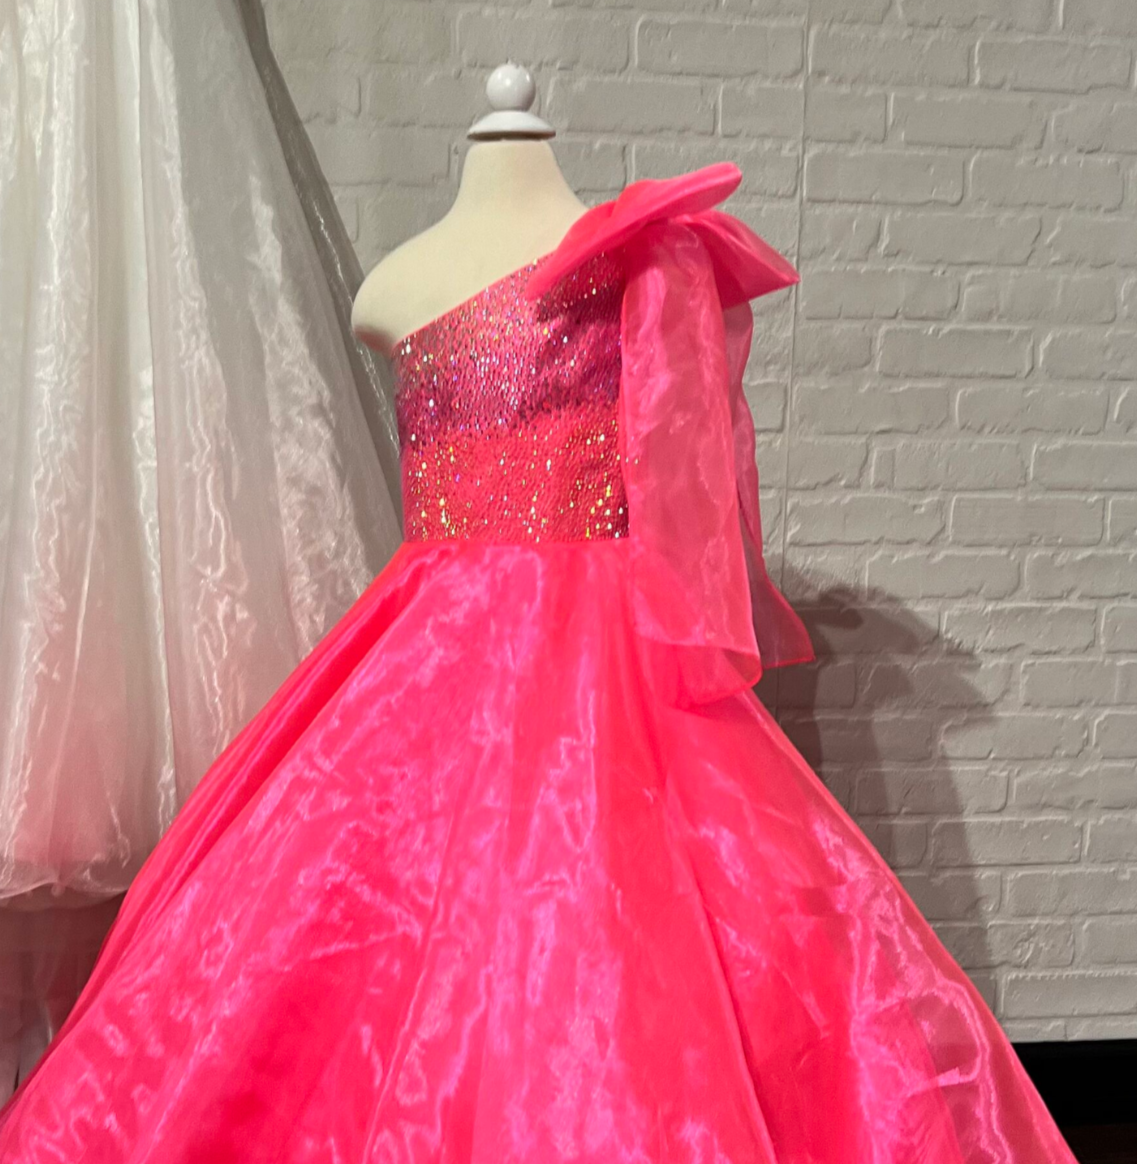 Sugar Kayne C310 Girls and Preteens One Shoulder Bow A Line Shimmer Pageant Dress Crystal Gown  Go ahead and take a BOW in this lovely one-shoulder organza ballgown. The ombre beaded bodice brings all the dazzle!  Colors: Orange, Yellow, Blue, White, Neon Pink